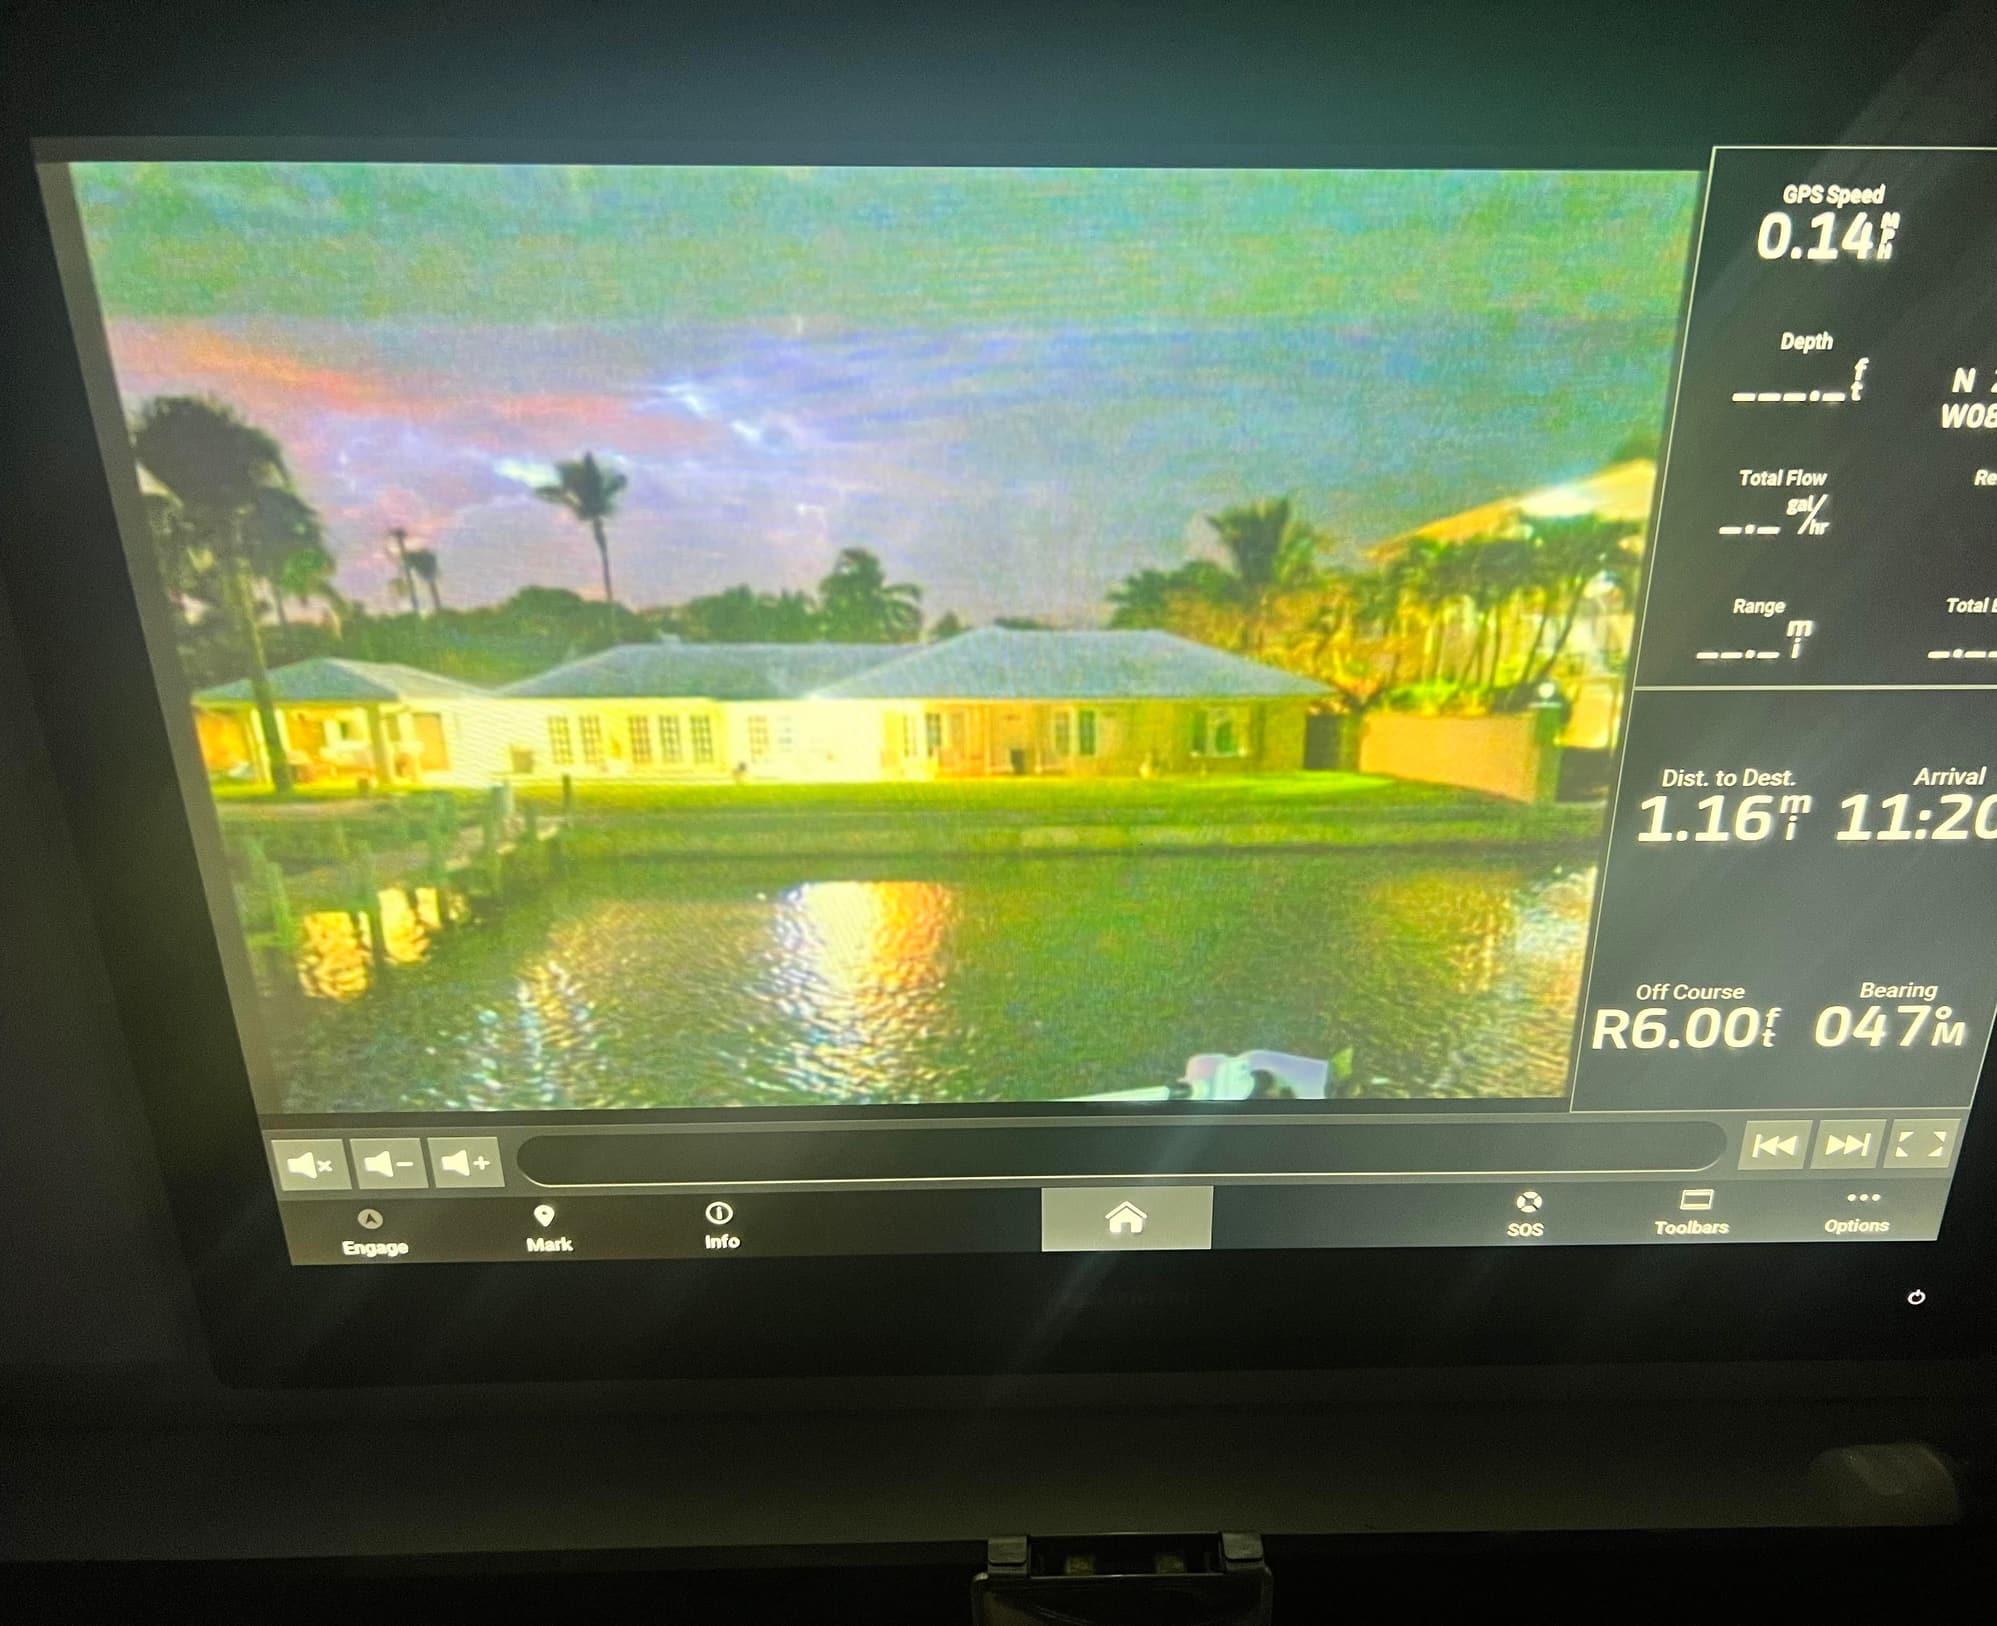 Flir camera mounted next to Radar - The Hull Truth - Boating and Fishing  Forum